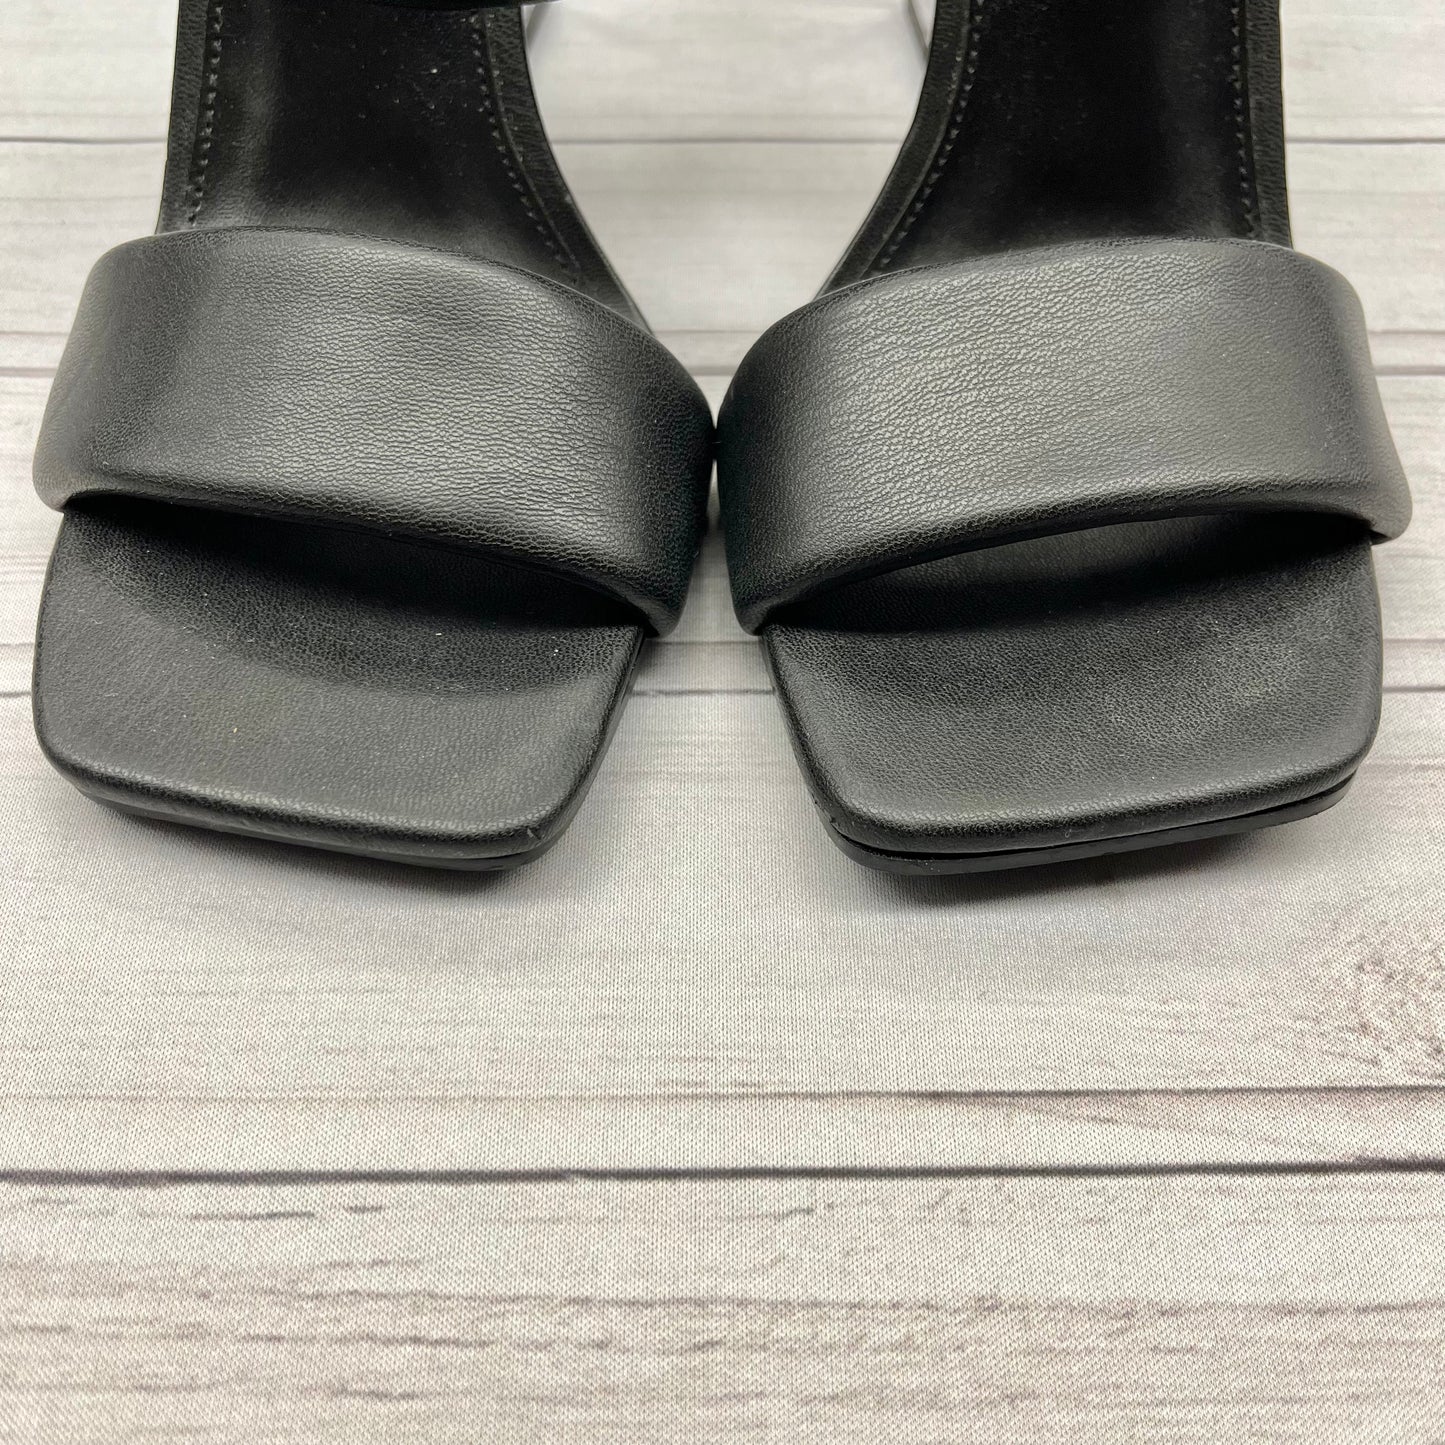 Sandals Heels Wedge By Steve Madden  Size: 10